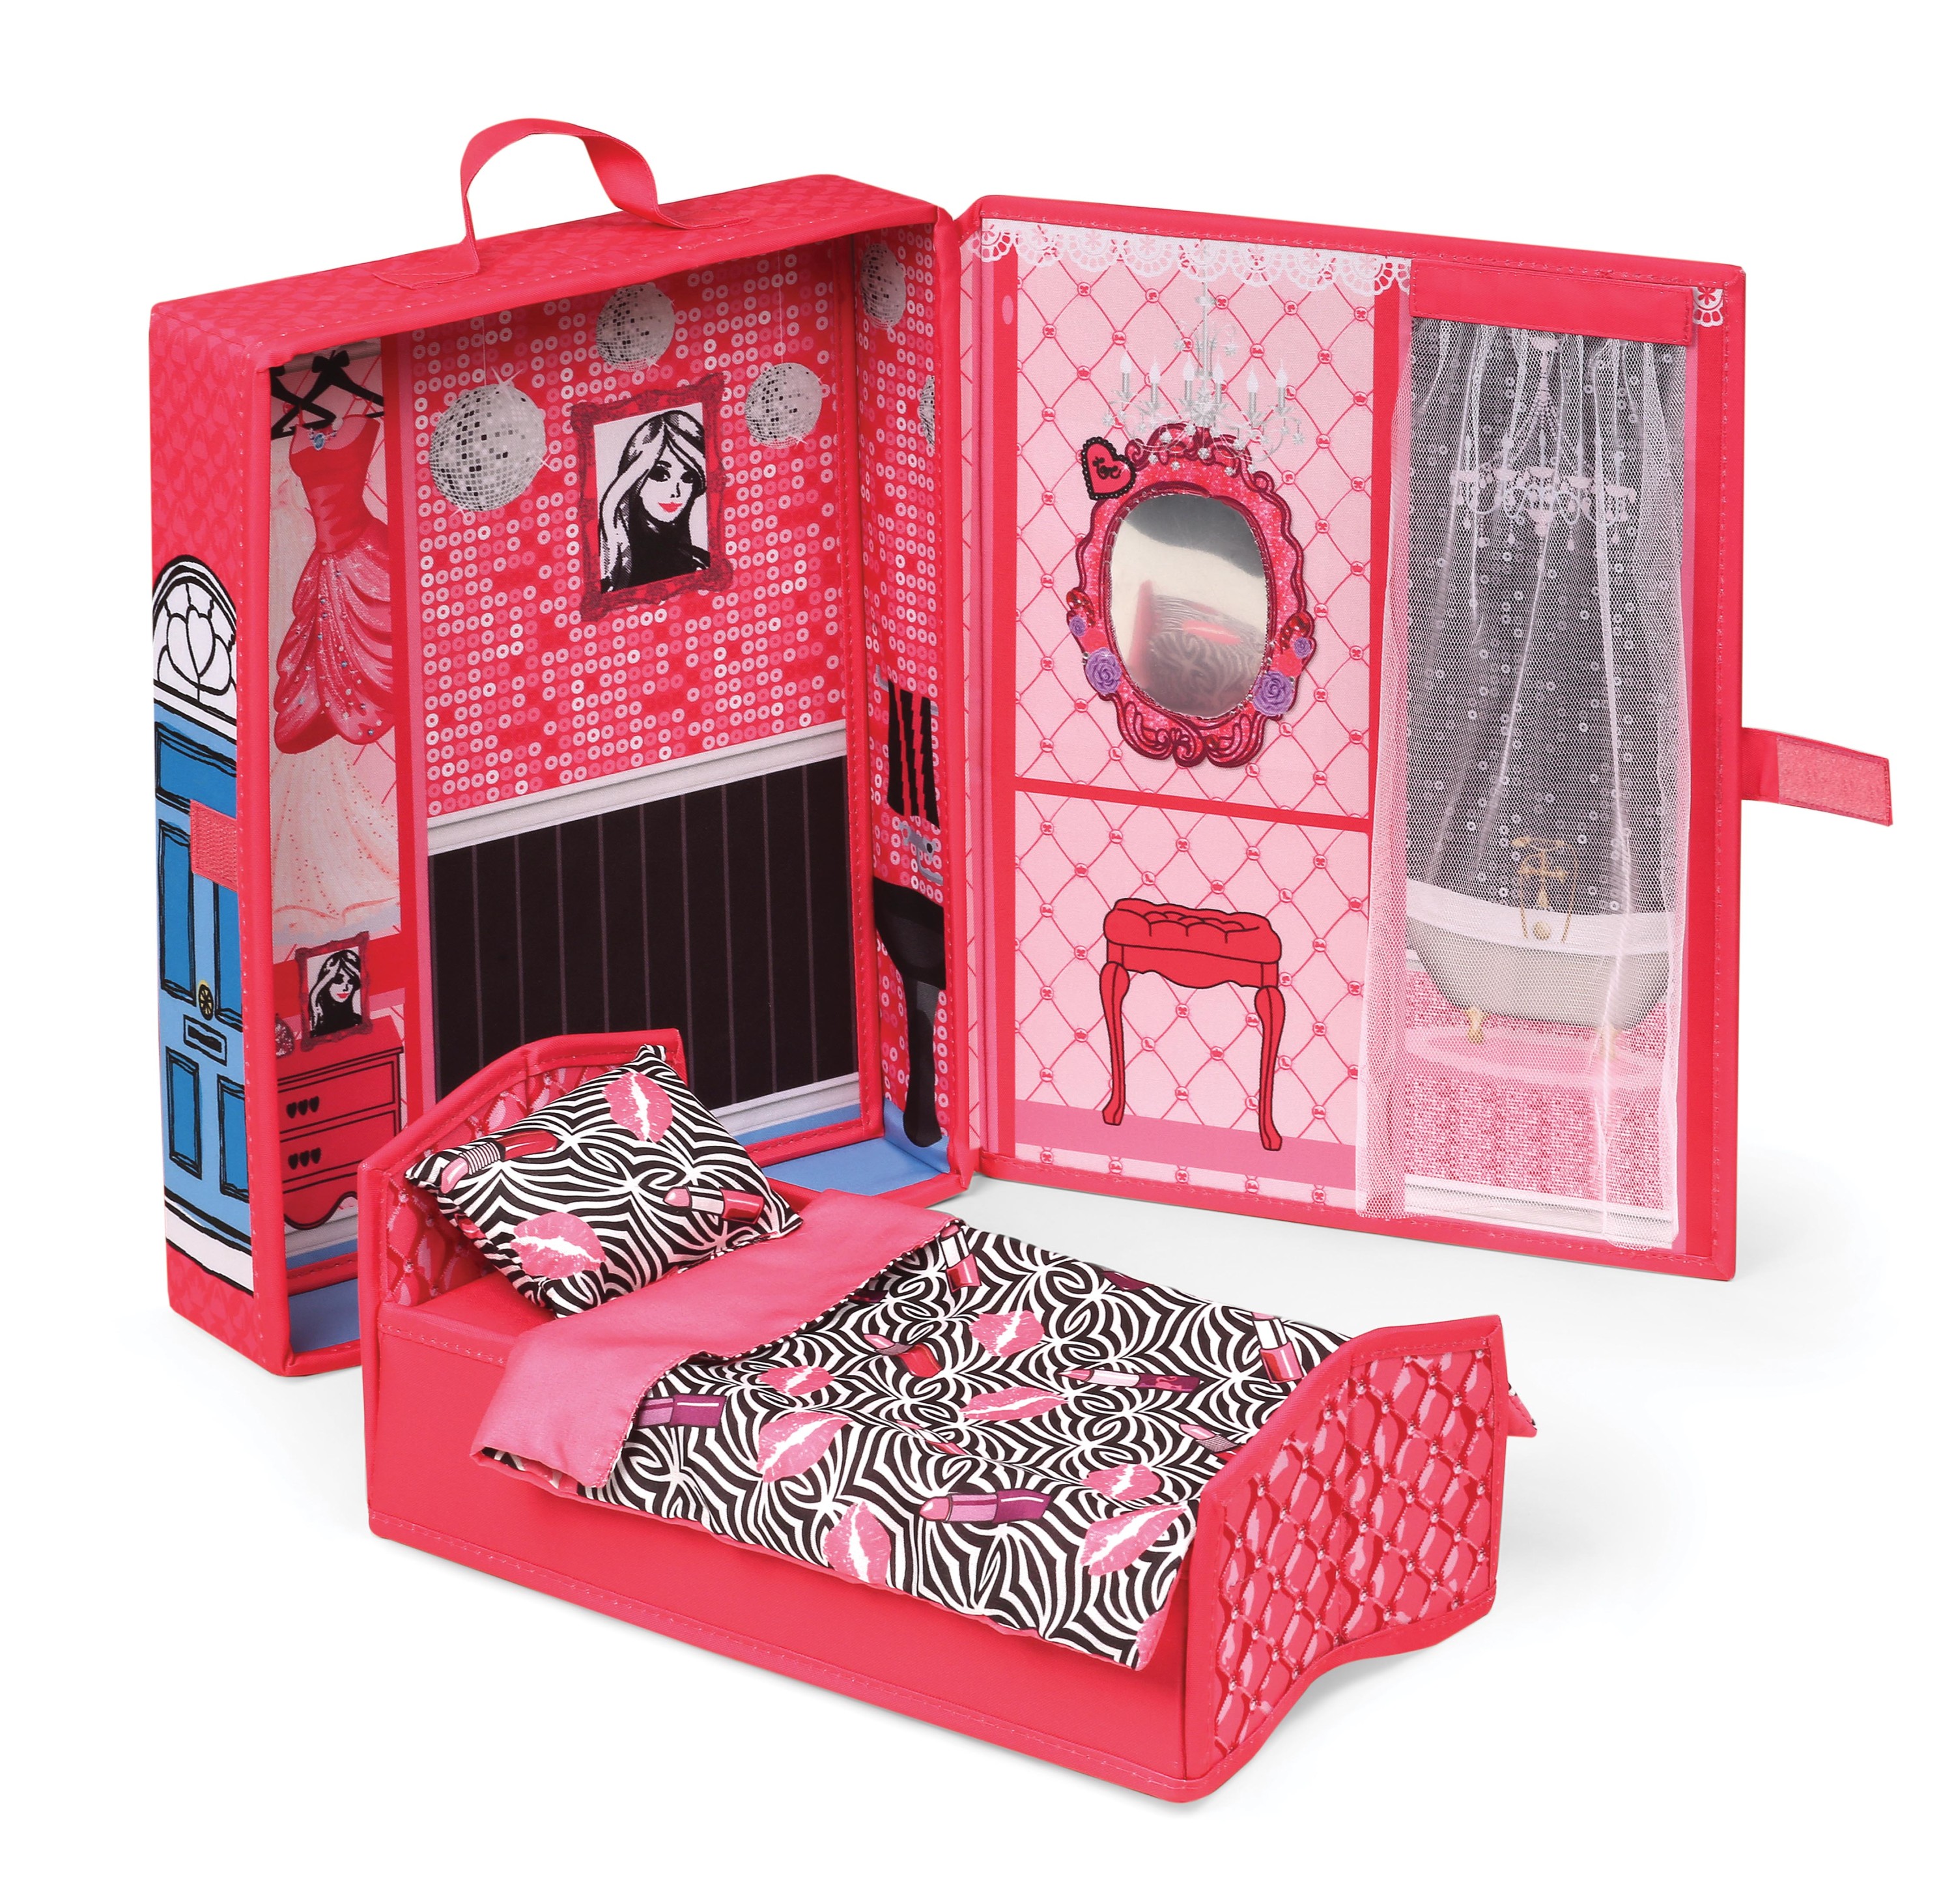 Badger Basket Home & Go Dollhouse Playset Travel Storage Case with Bed for 12 inch Fashion Doll - image 1 of 11